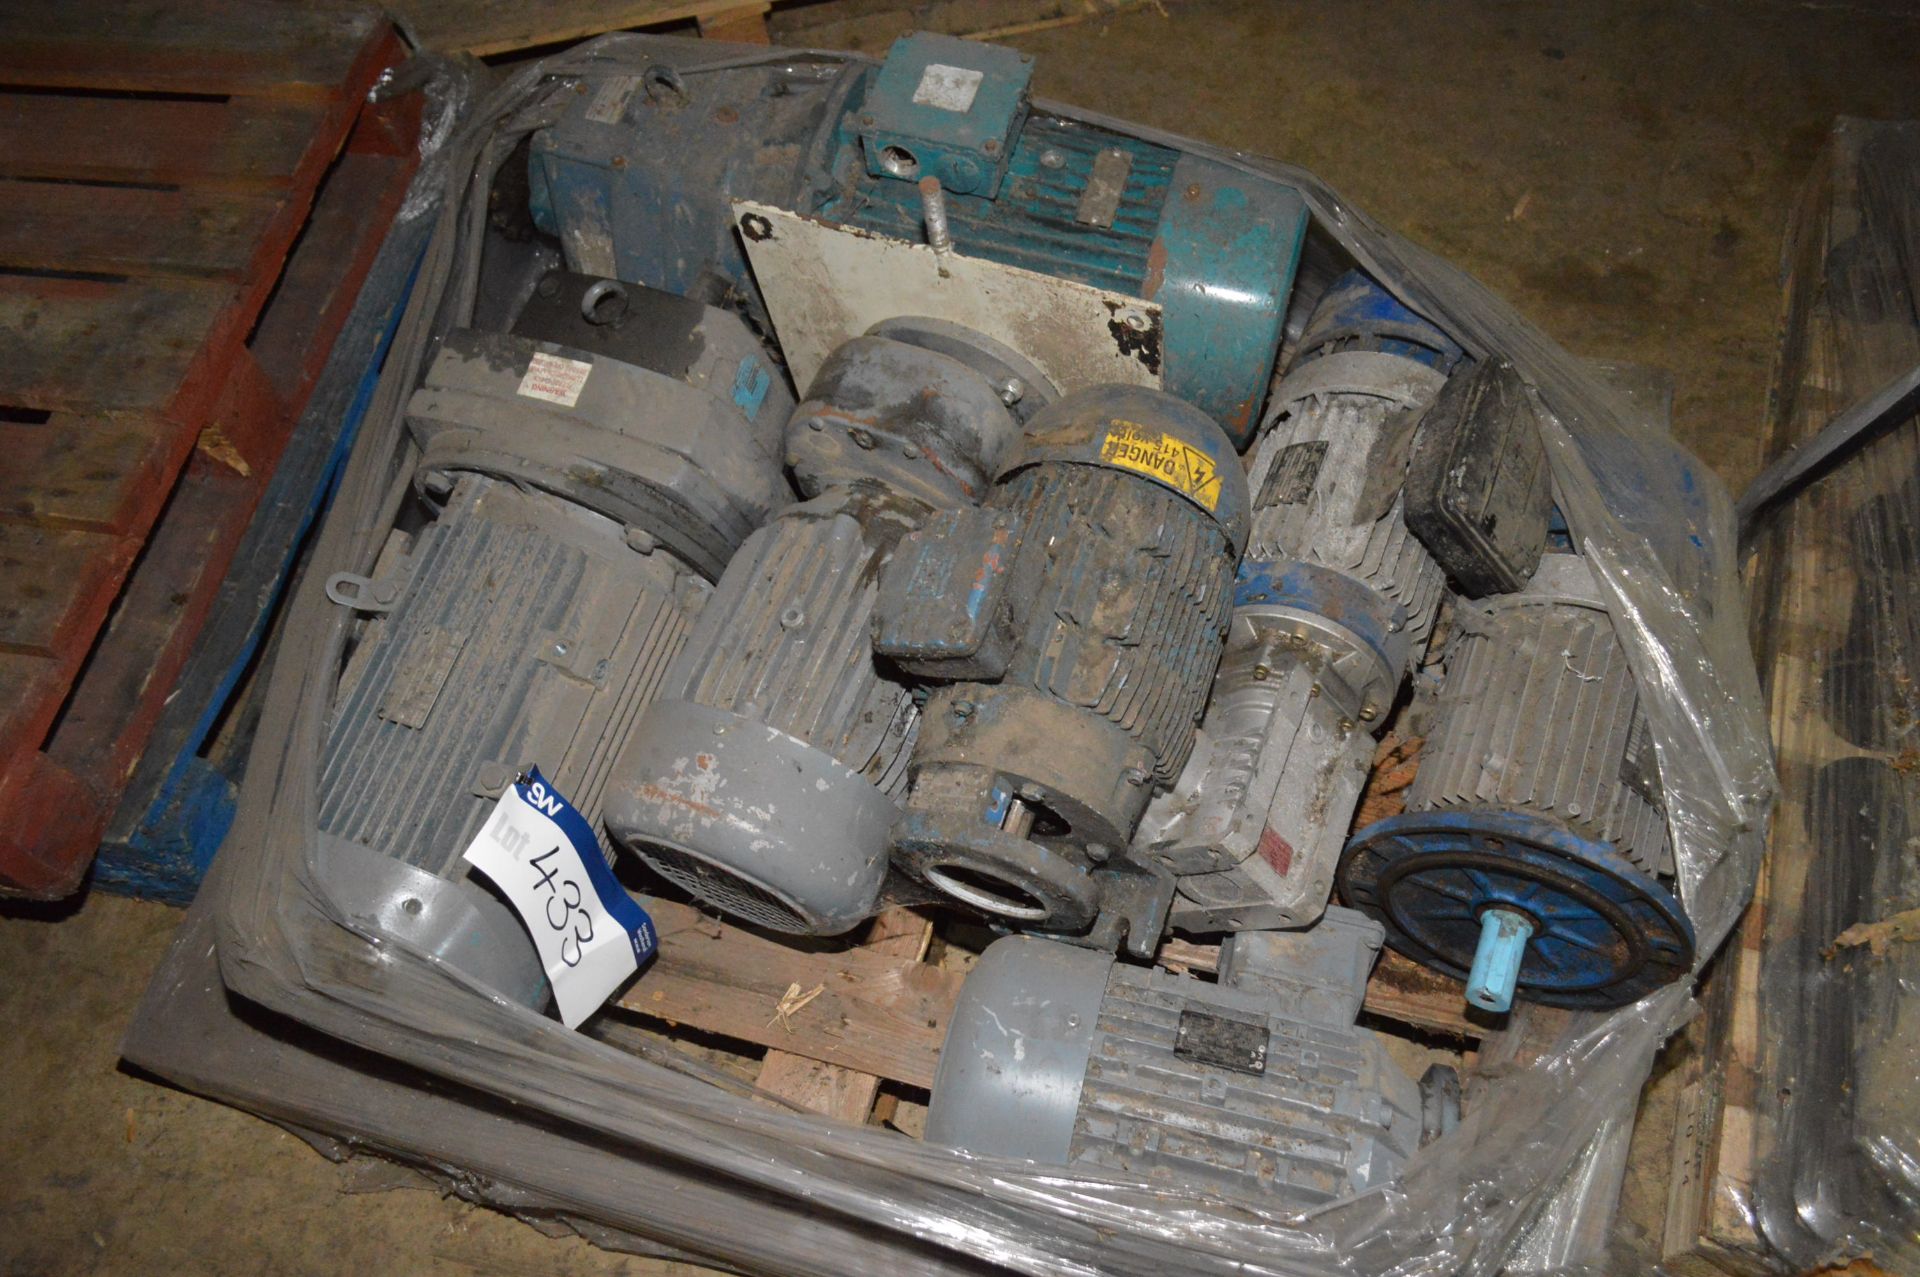 Mainly Geared Electric Motors, on one pallet, up to approx. 7.5kW - Bild 2 aus 4